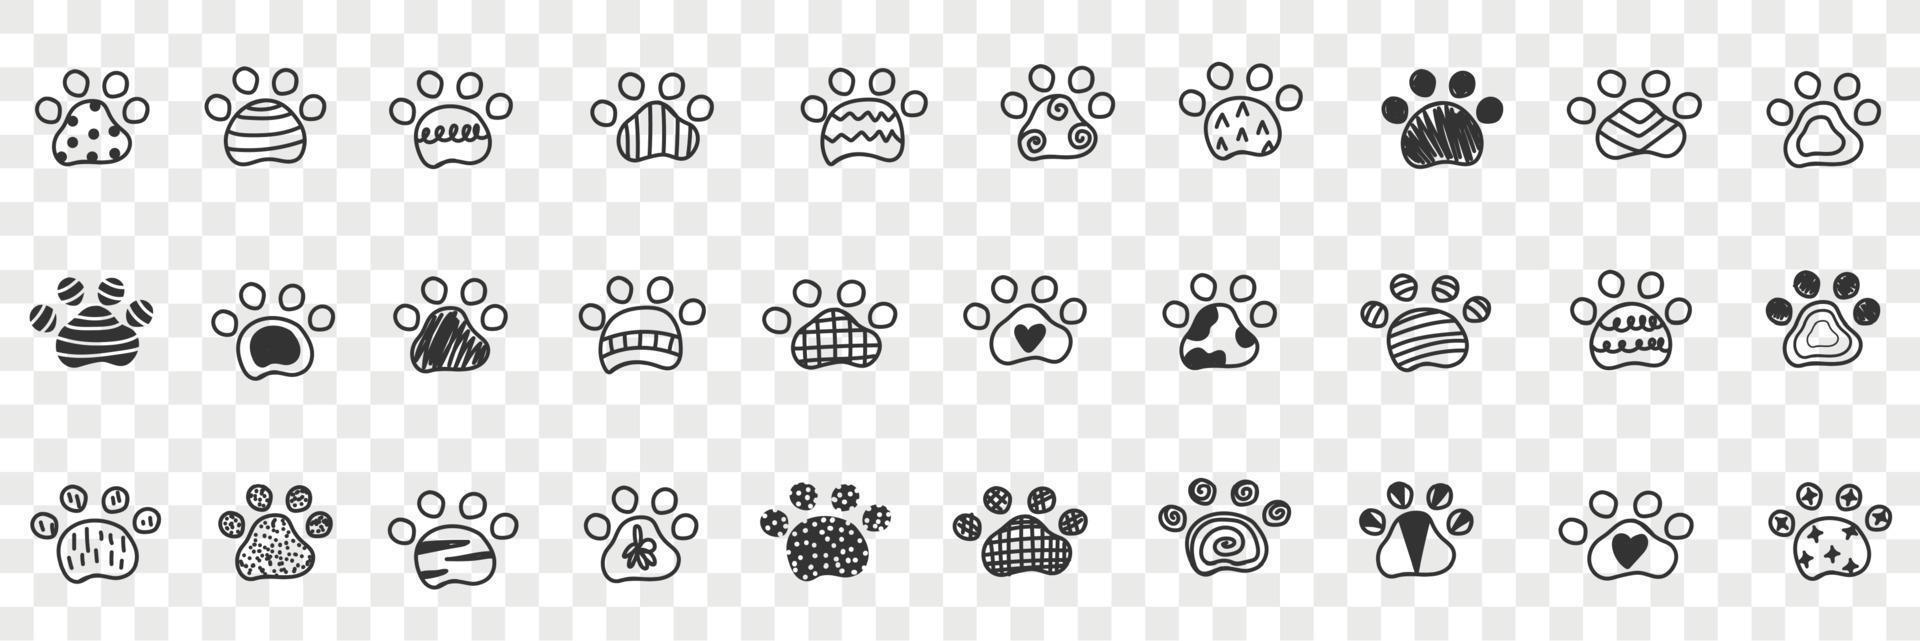 Animals paws footprints doodle set. Collection of hand drawn footprints imprints of animals dogs with various patterns in rows isolated on transparent background vector